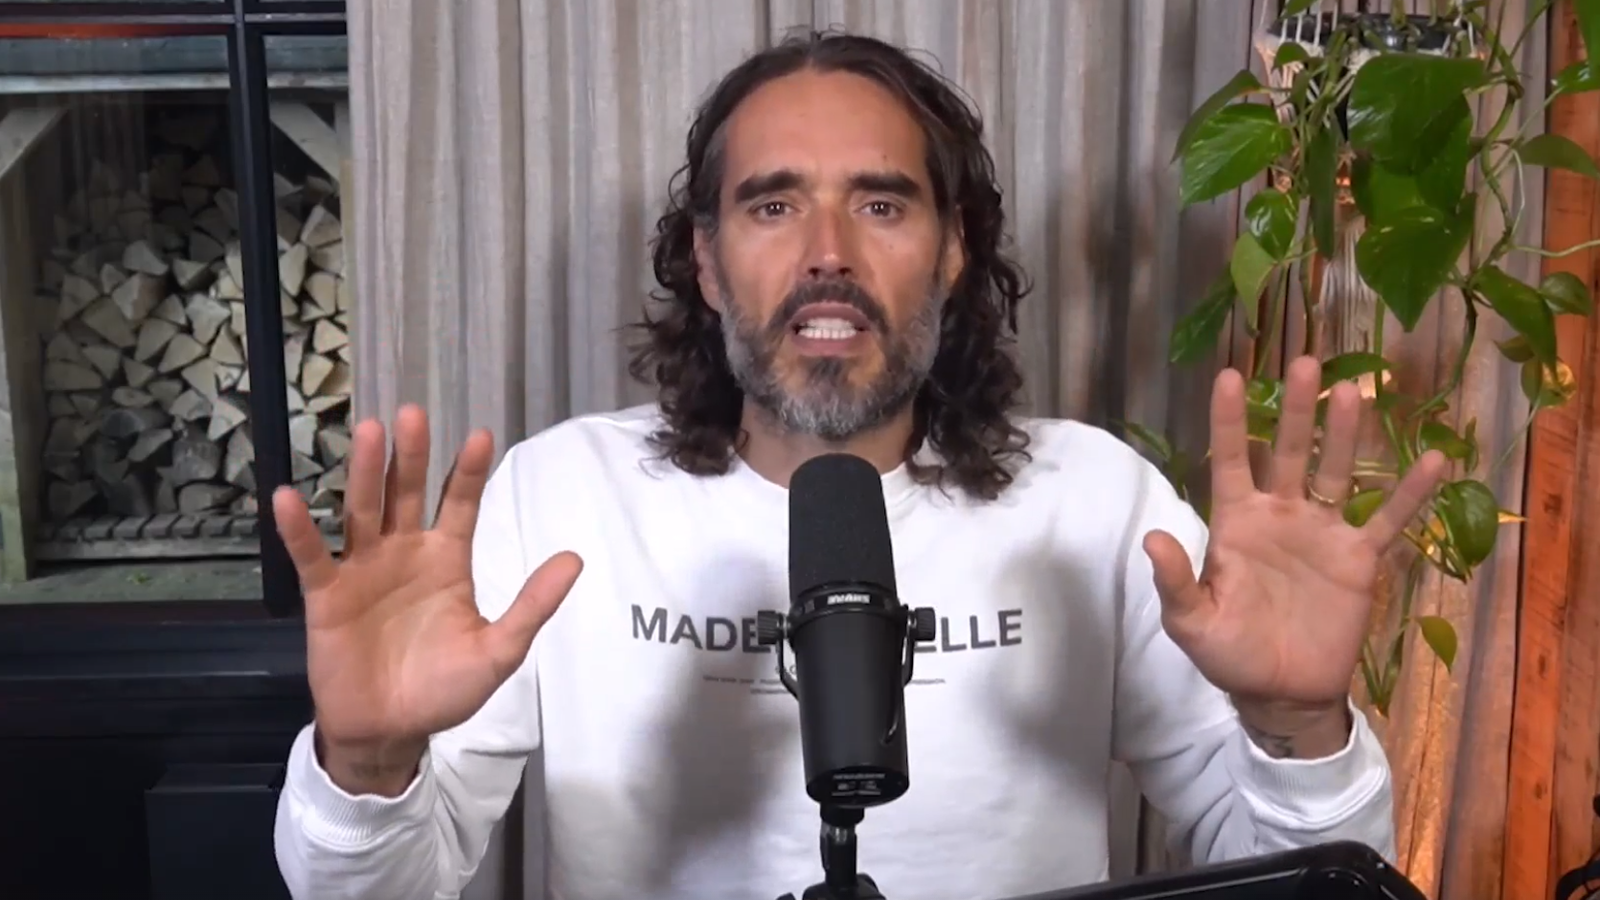 Russell Brand says he is 'incredibly moved' by support of fans after sexual abuse allegations